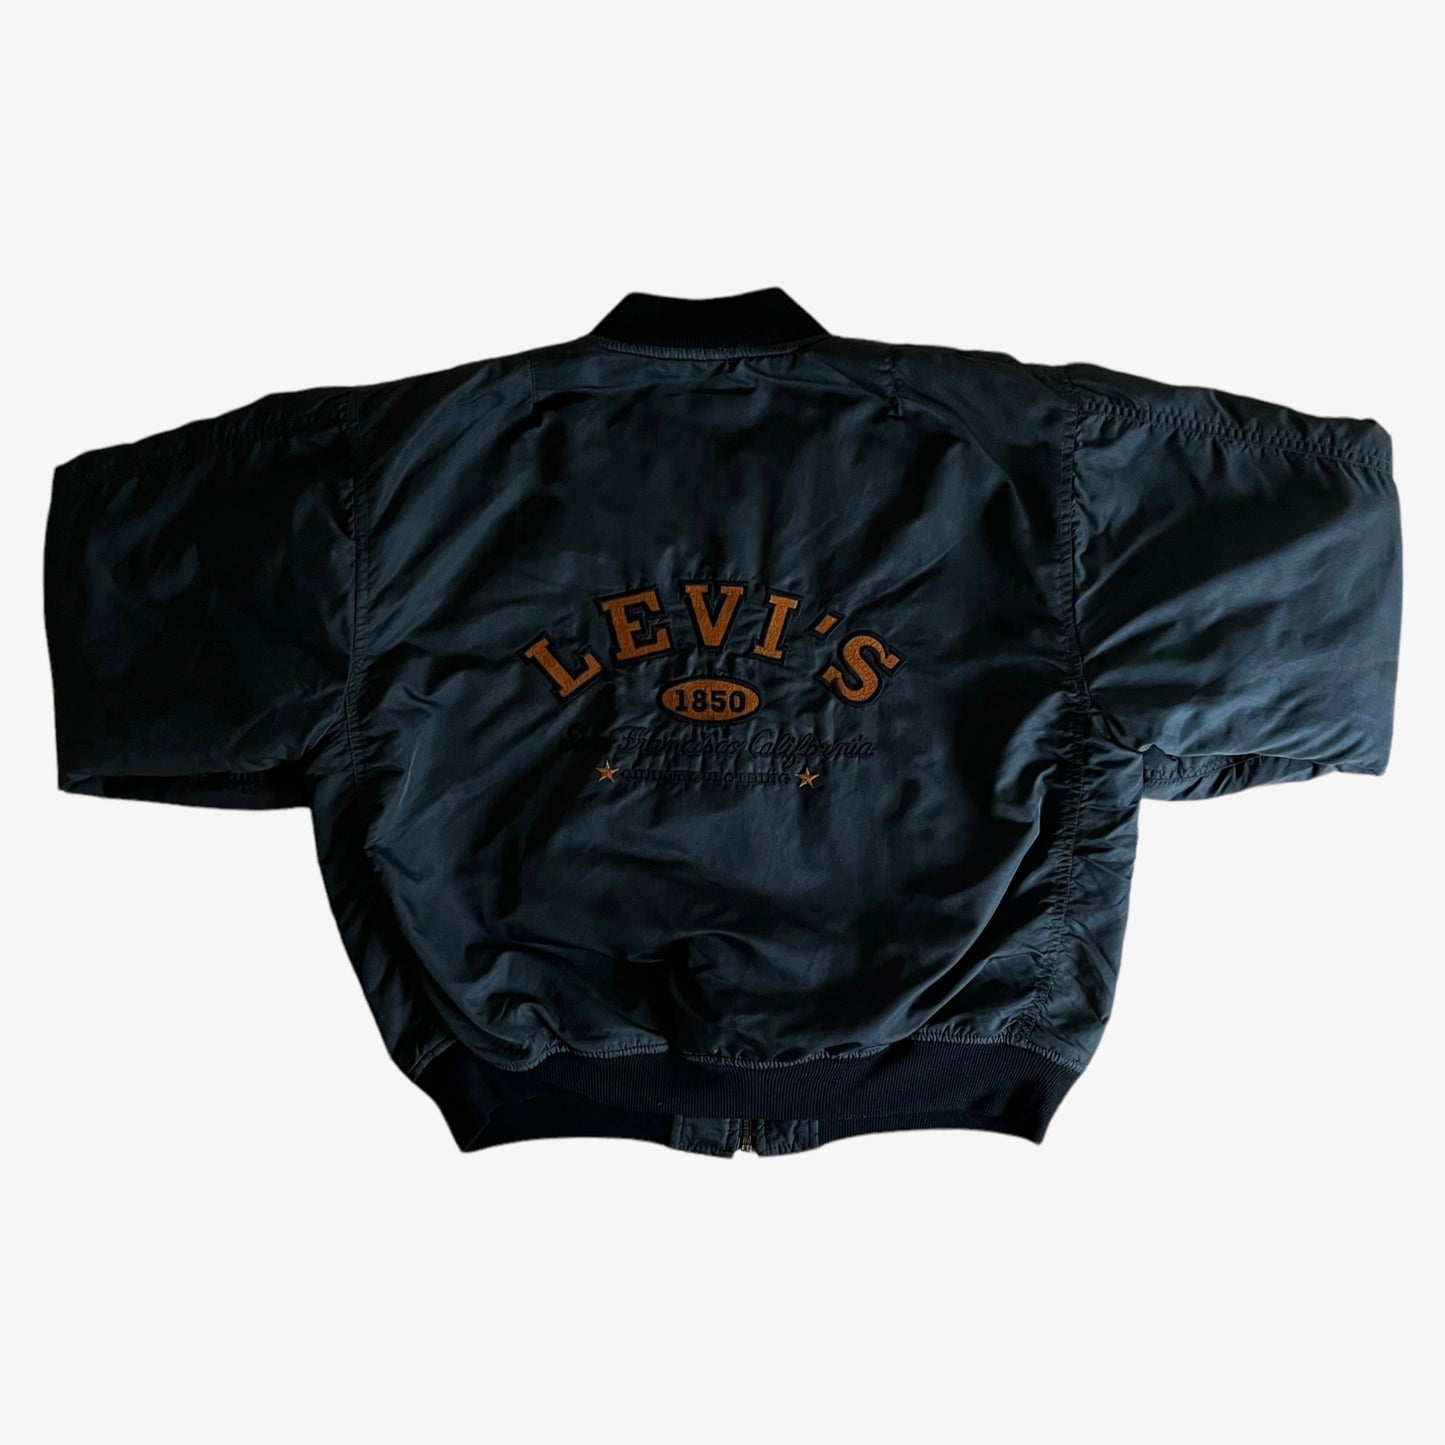 Vintage 90s Womens Levis Bomber Jacket With Back Spell Out Back - Casspios Dream